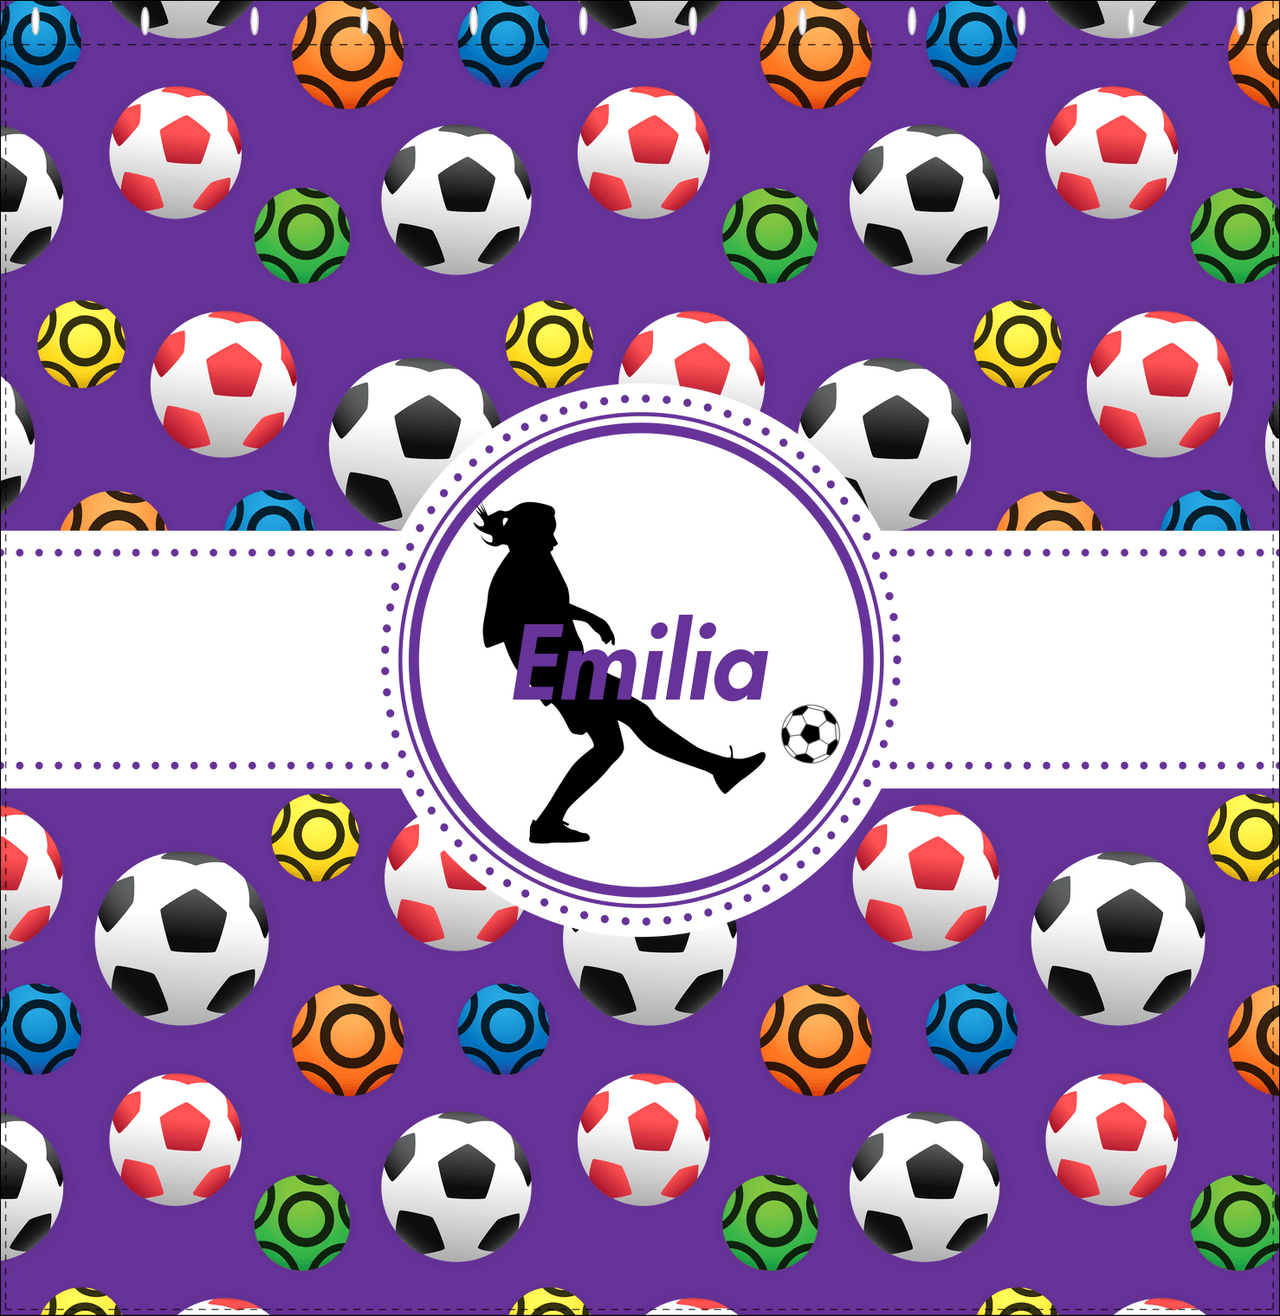 Personalized Soccer Shower Curtain XLVIII - Purple Background - Girl Silhouette VI - Decorate View